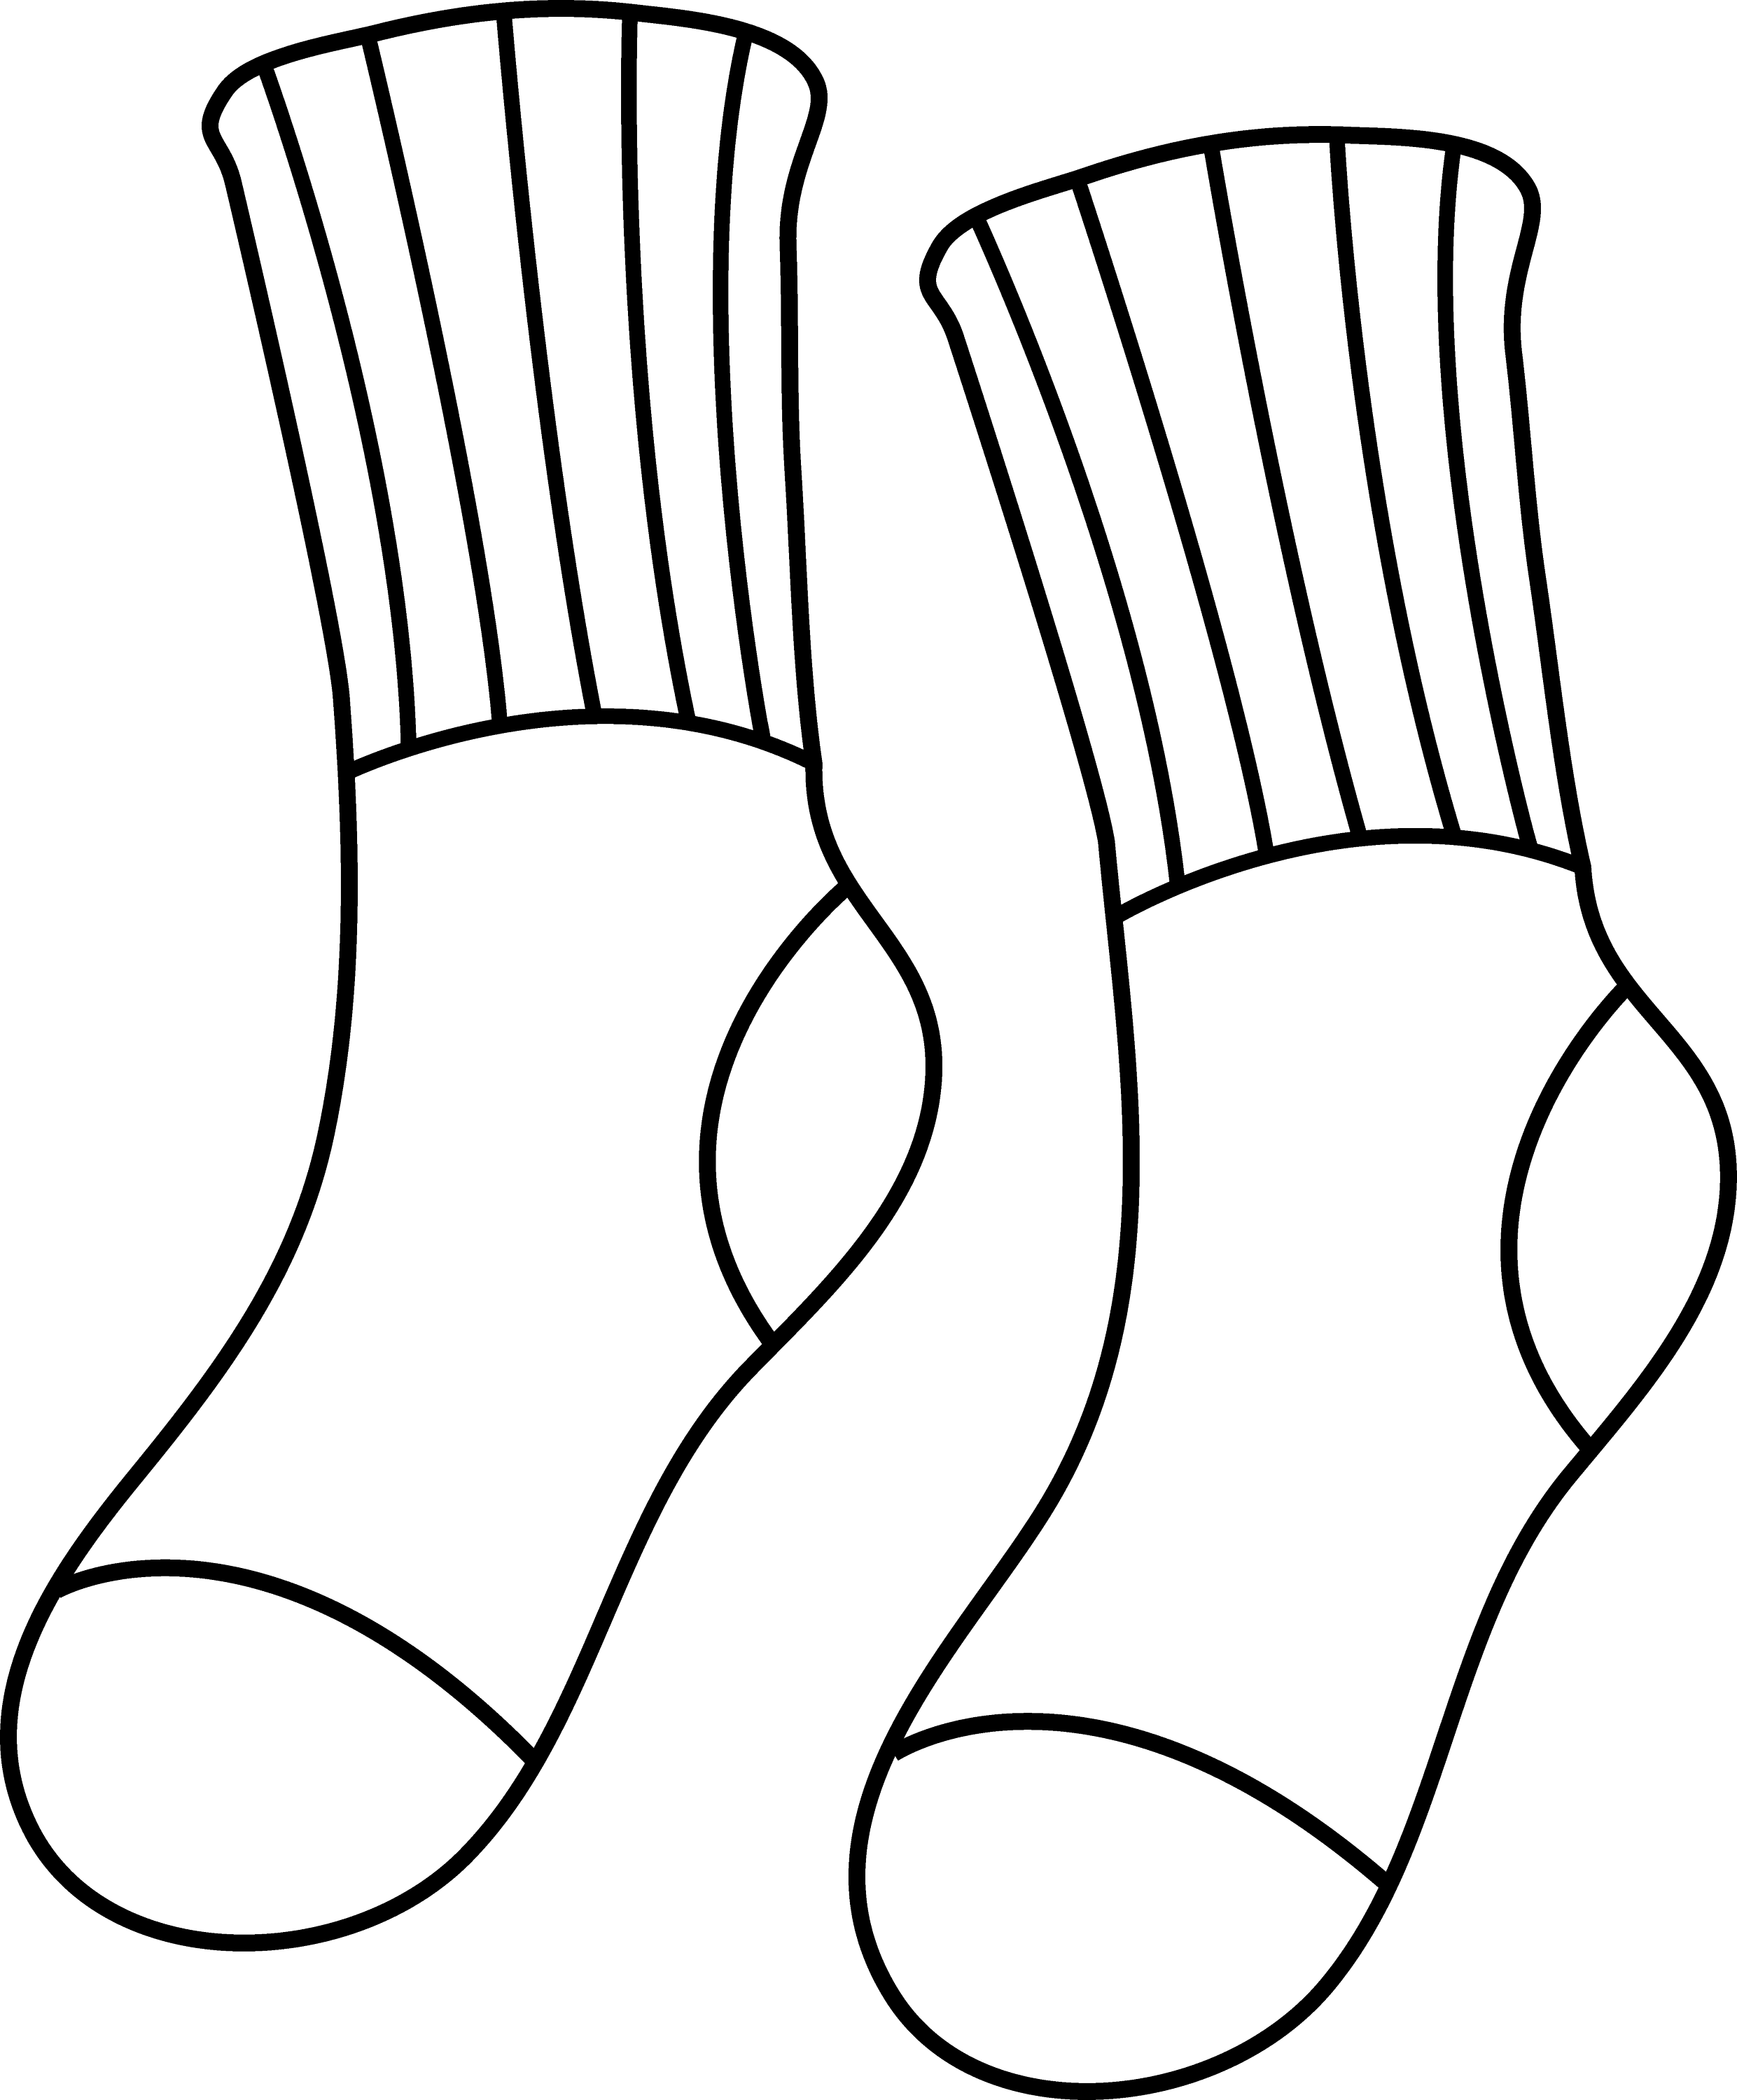 75 Cartoon Sock Coloring Page with Animal character